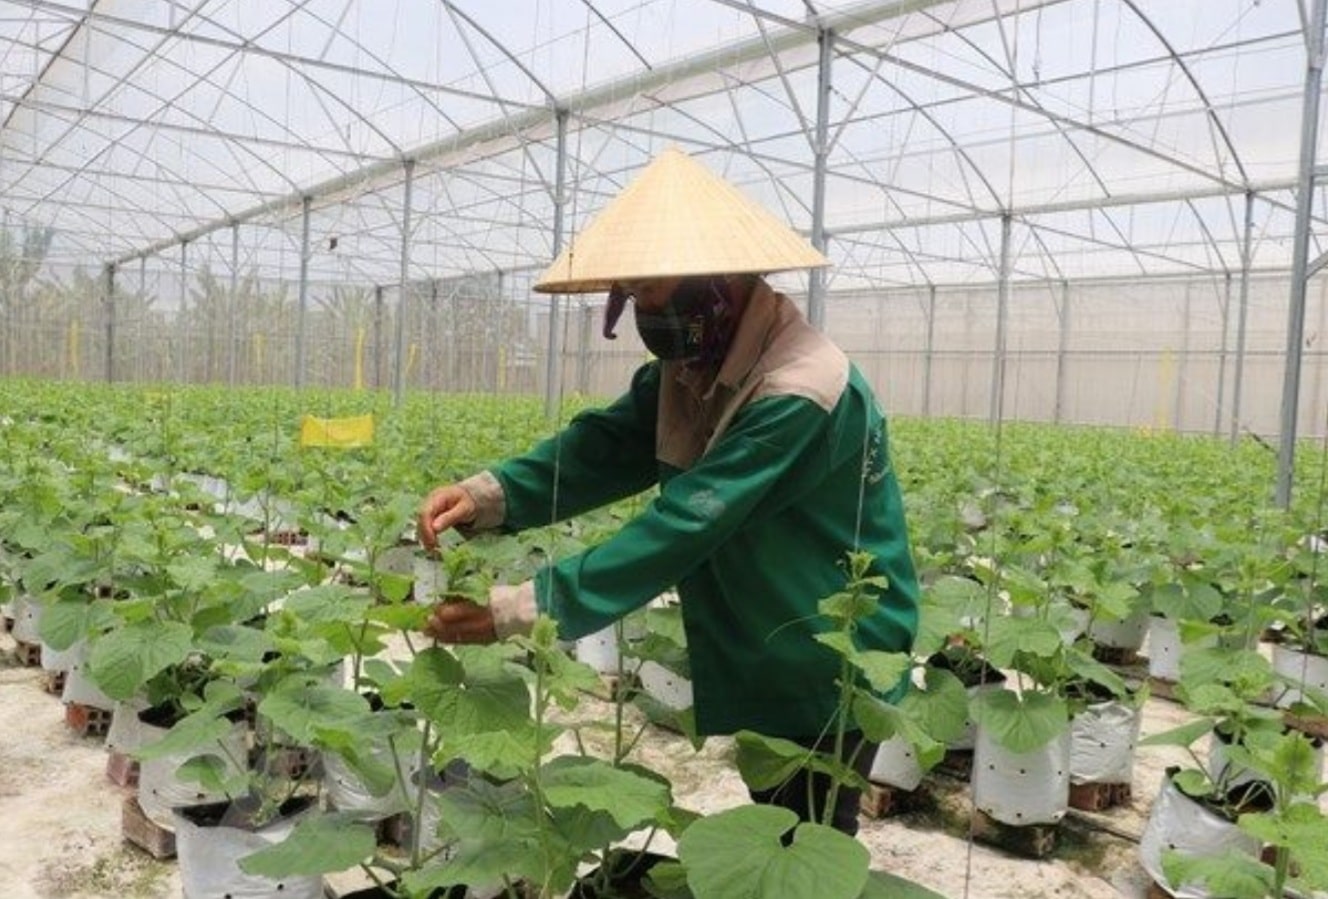 Vietnam: Science to be used to ensure food security, nutritional balance